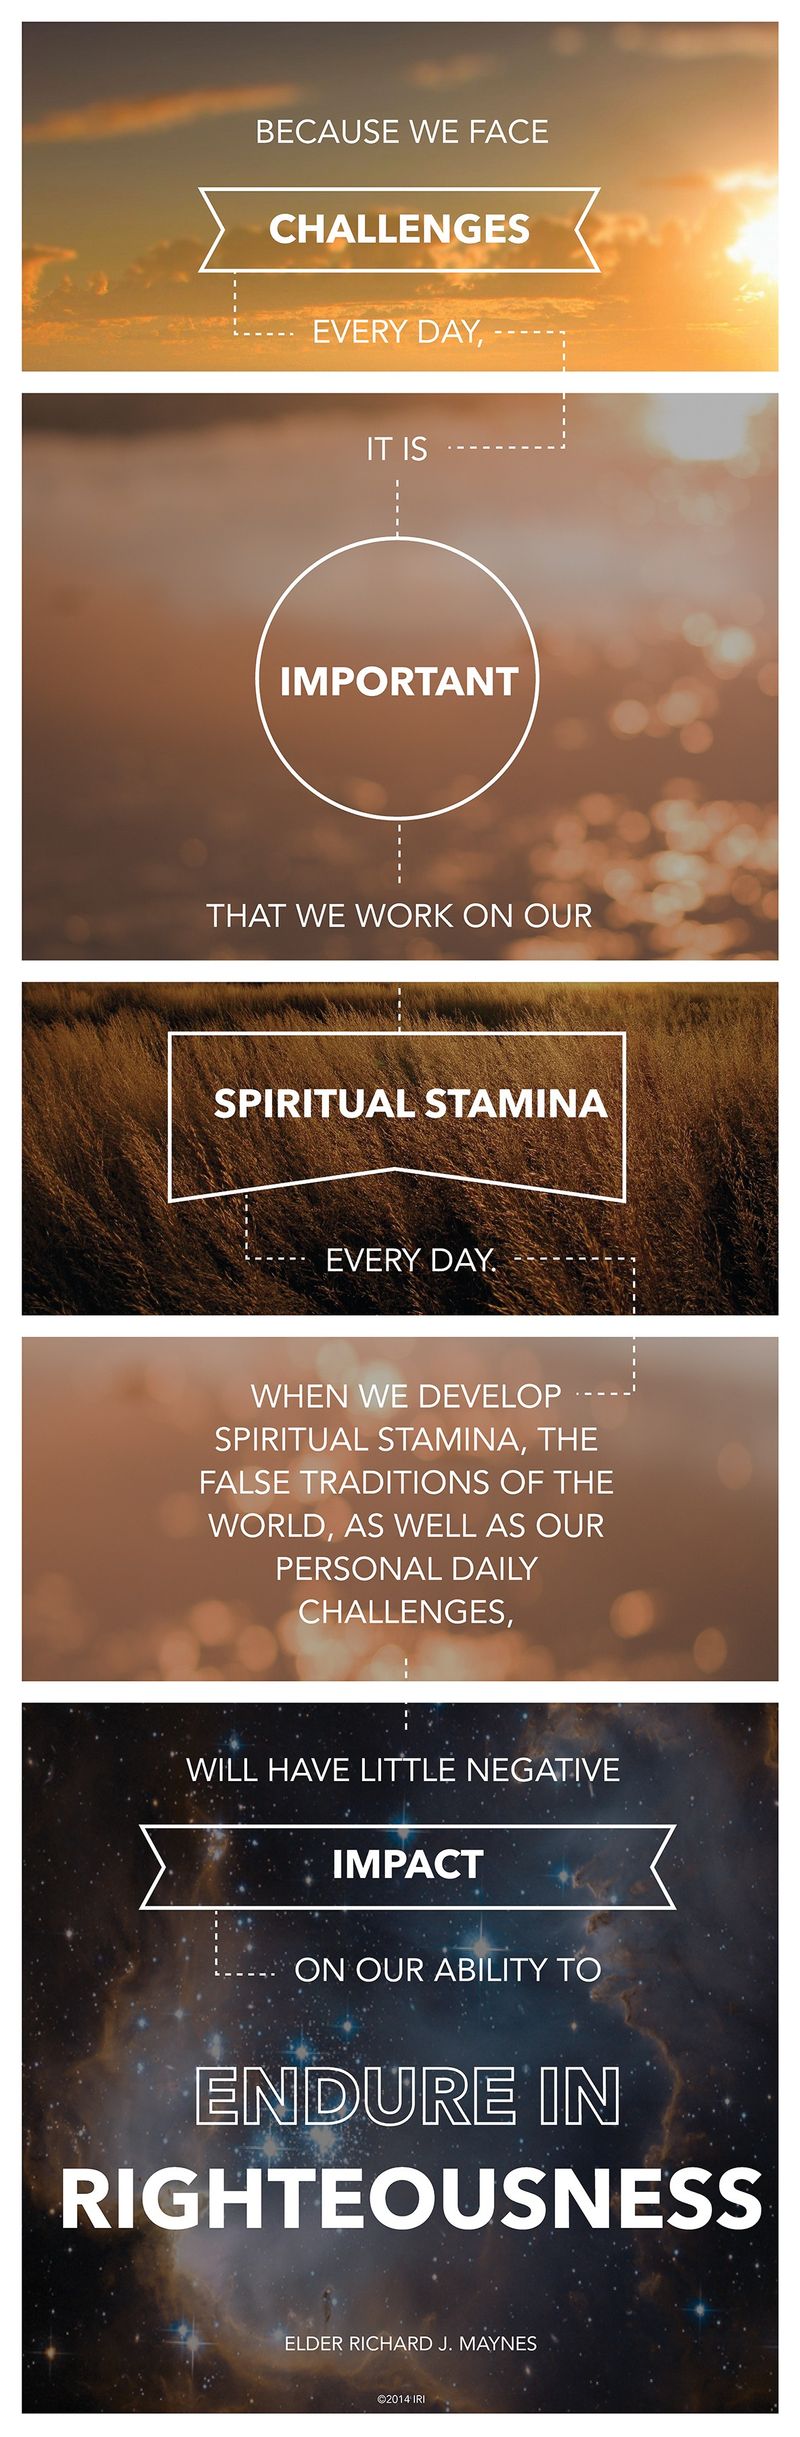 “Because we face challenges every day, it is important that we work on our spiritual stamina every day. When we develop spiritual stamina, the false traditions of the world, as well as our personal daily challenges, will have little negative impact on our ability to endure in righteousness.”—Elder Richard J. Maynes